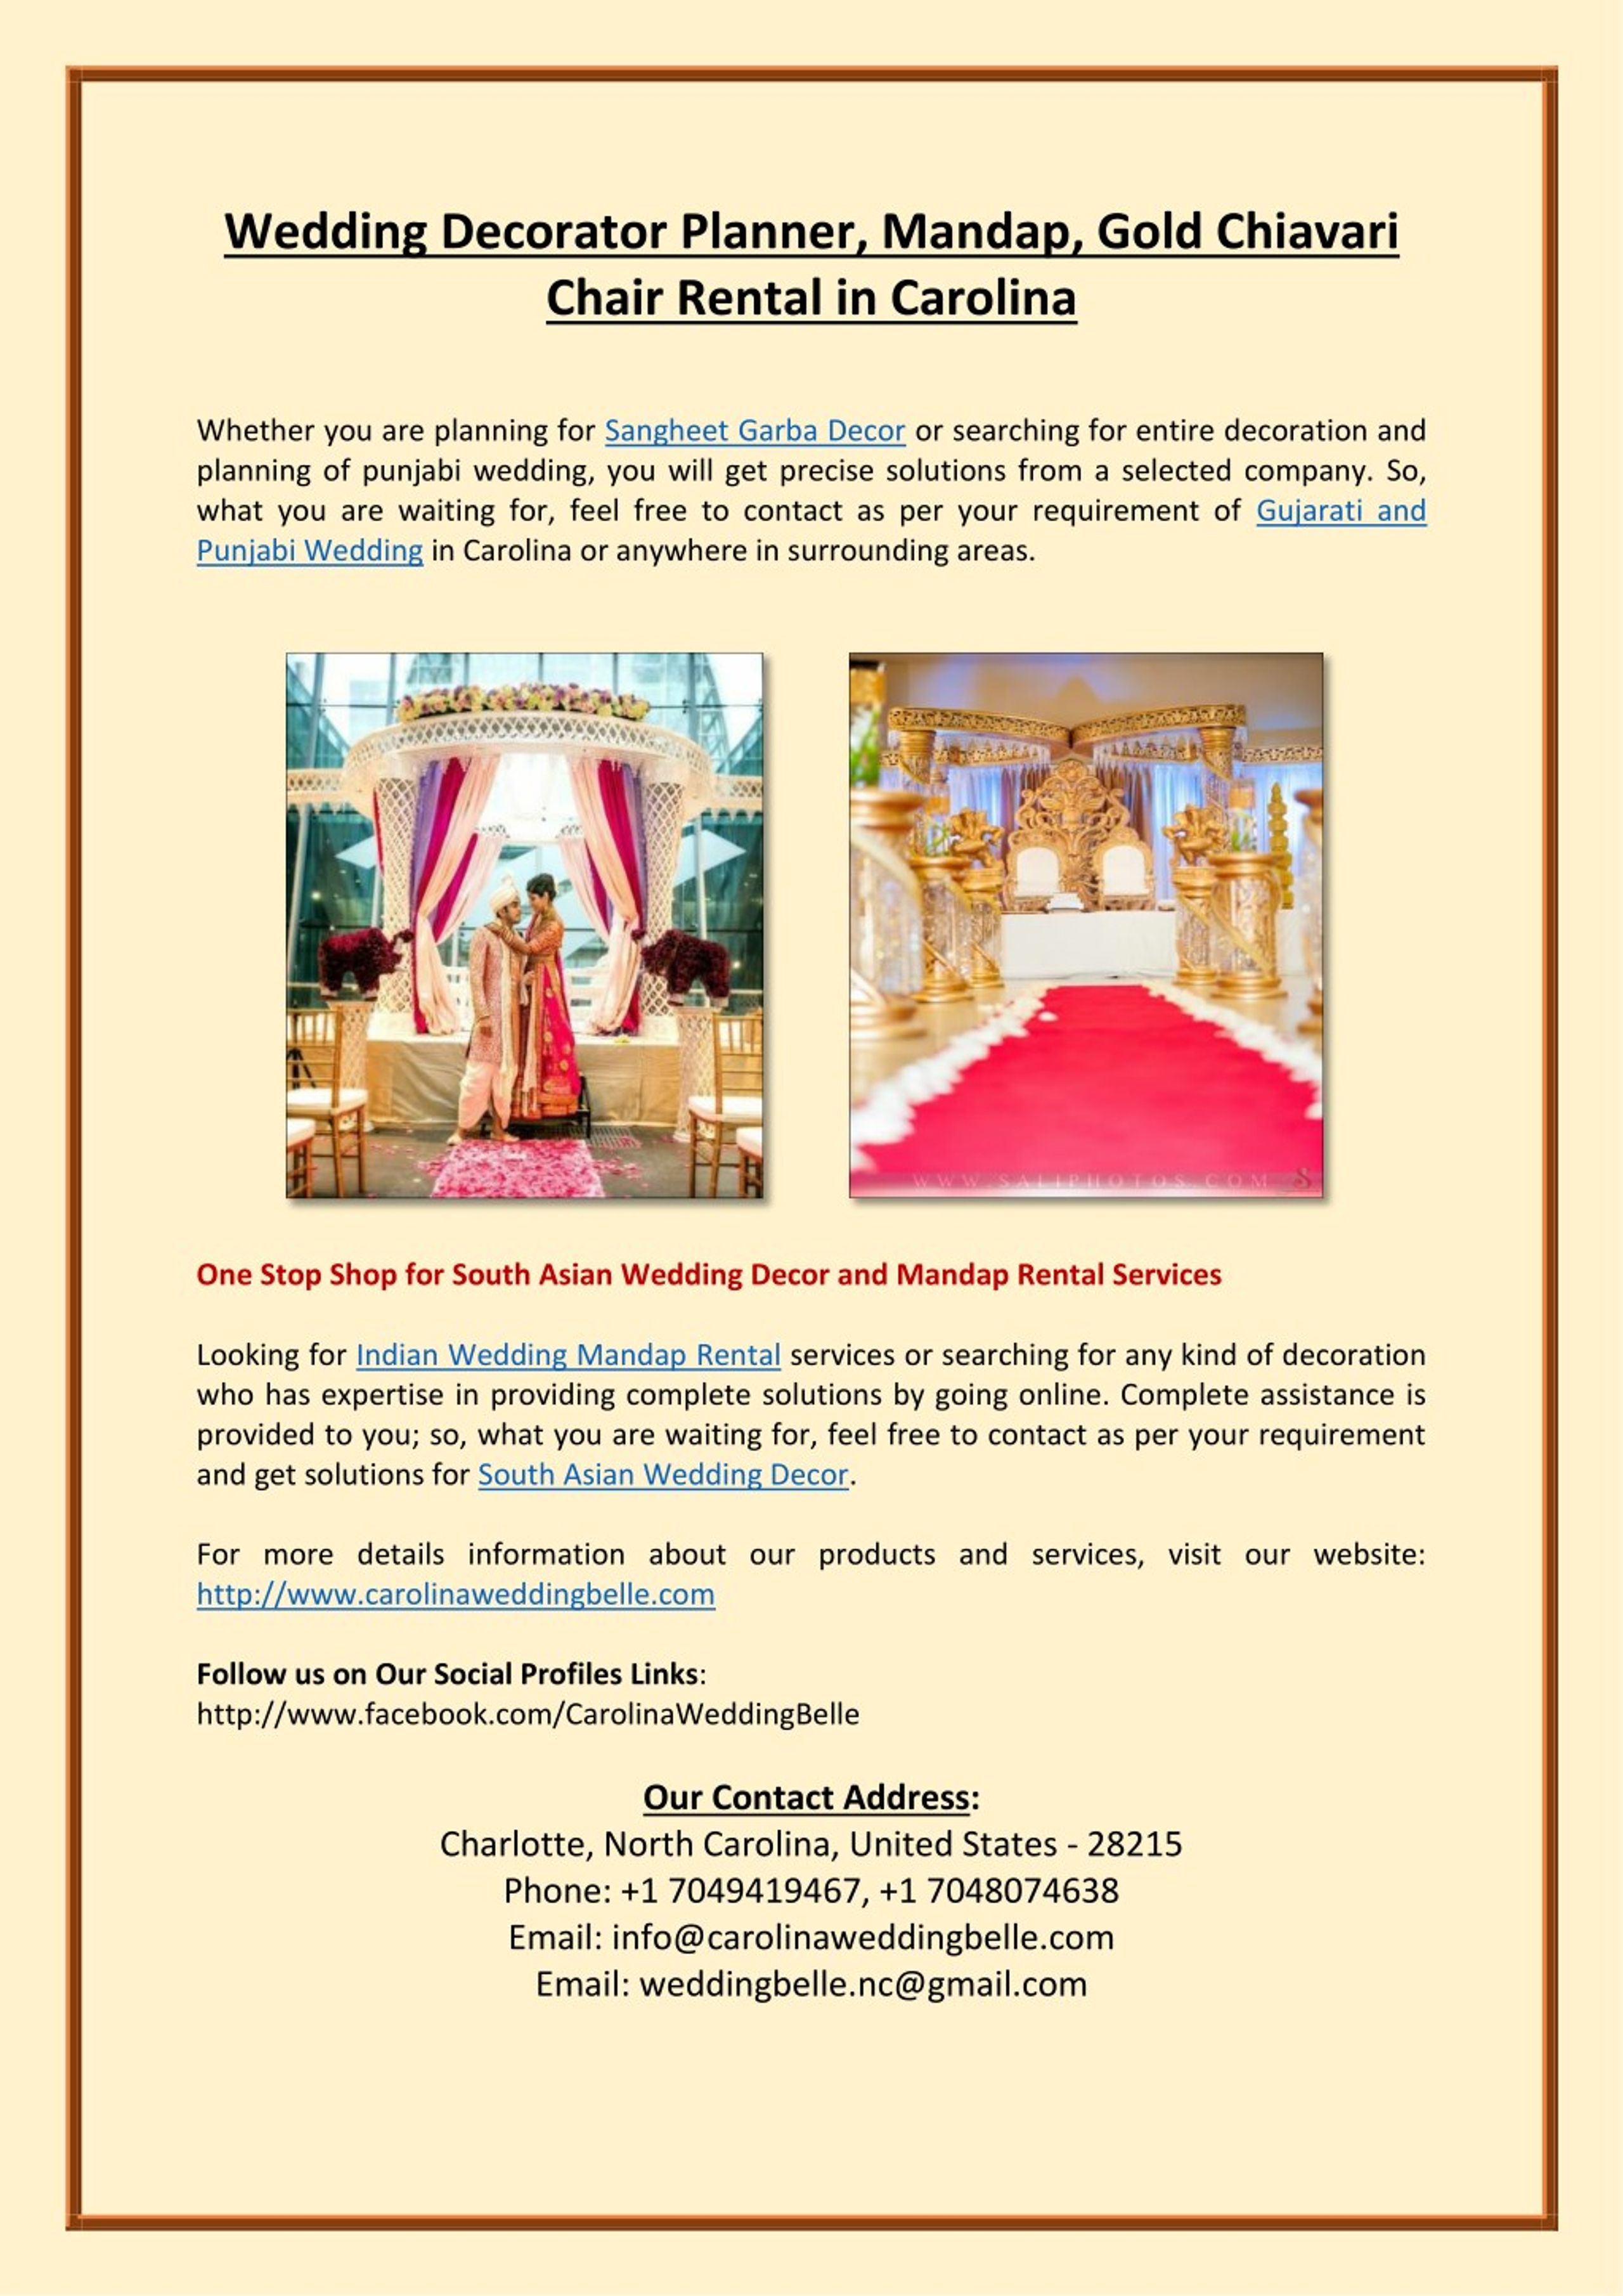 How to Select Chairs for an Indian Wedding - Indian wedding guides